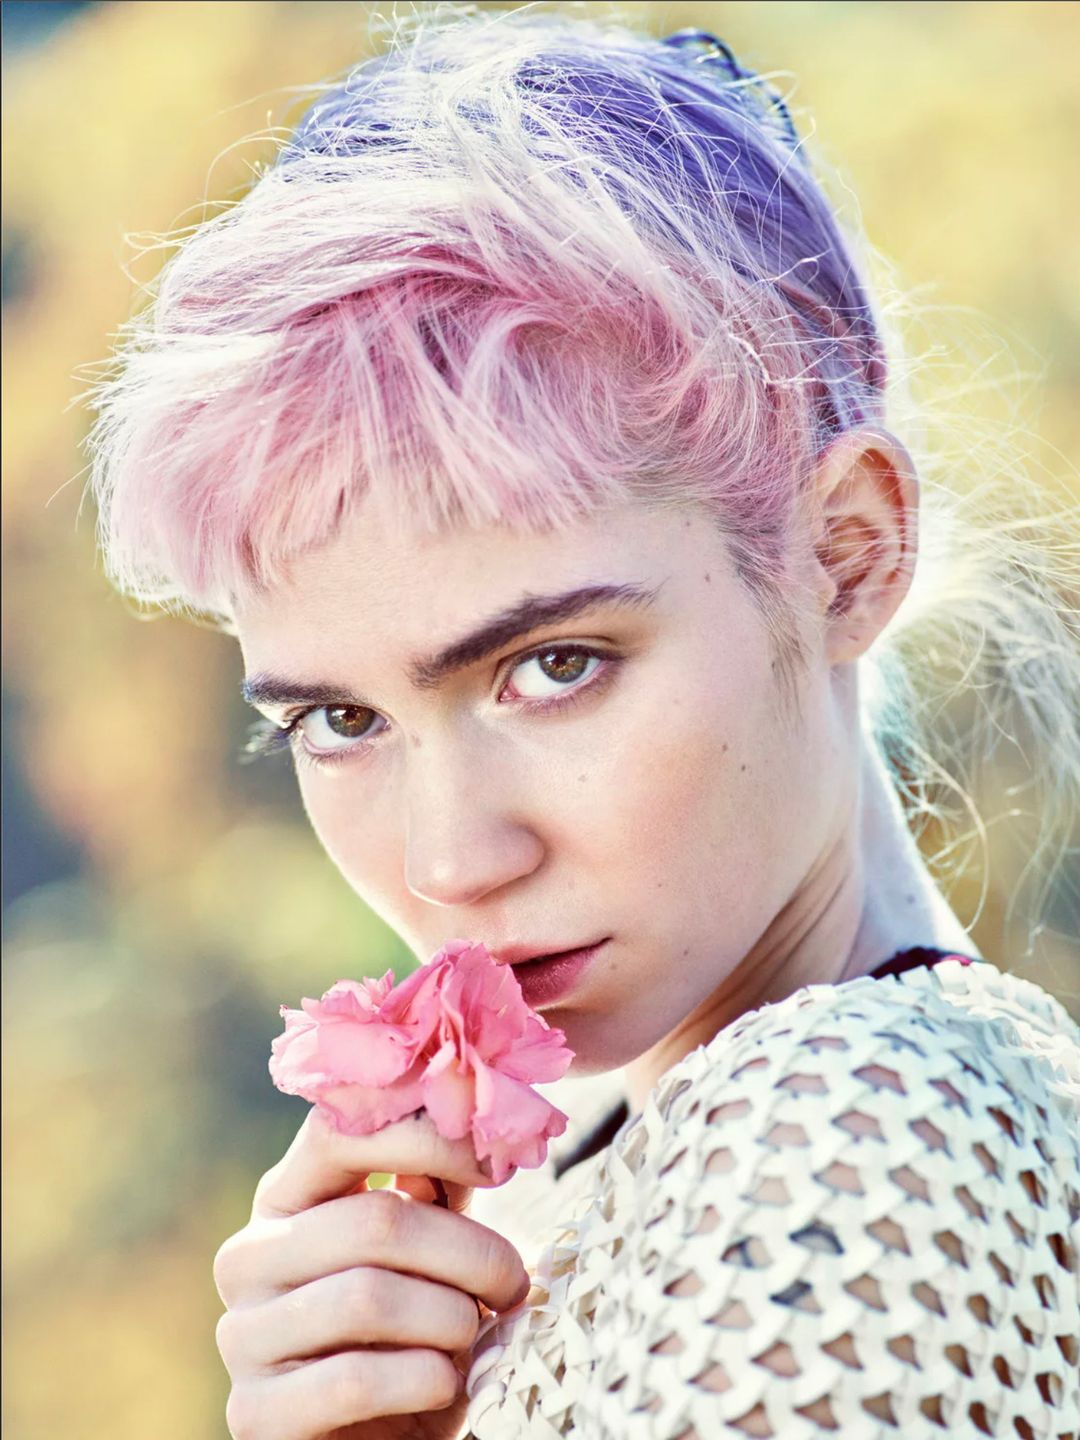 Grimes does she have a husband